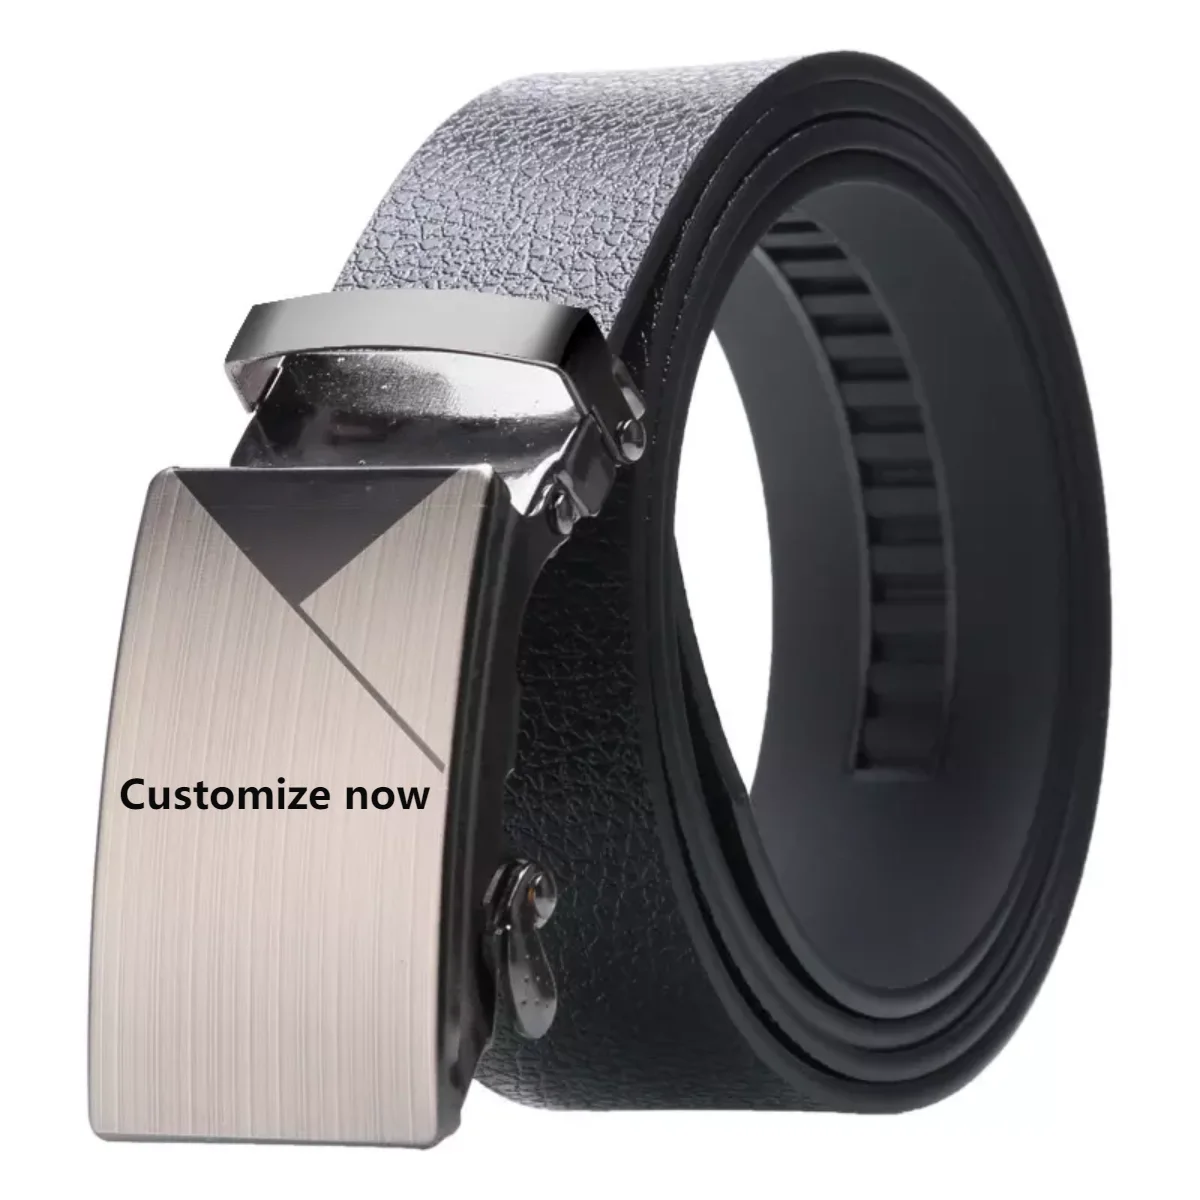 Gold/Silver Genuine Leather Automatic Buckle Waist Strap Belt Black Waistband 